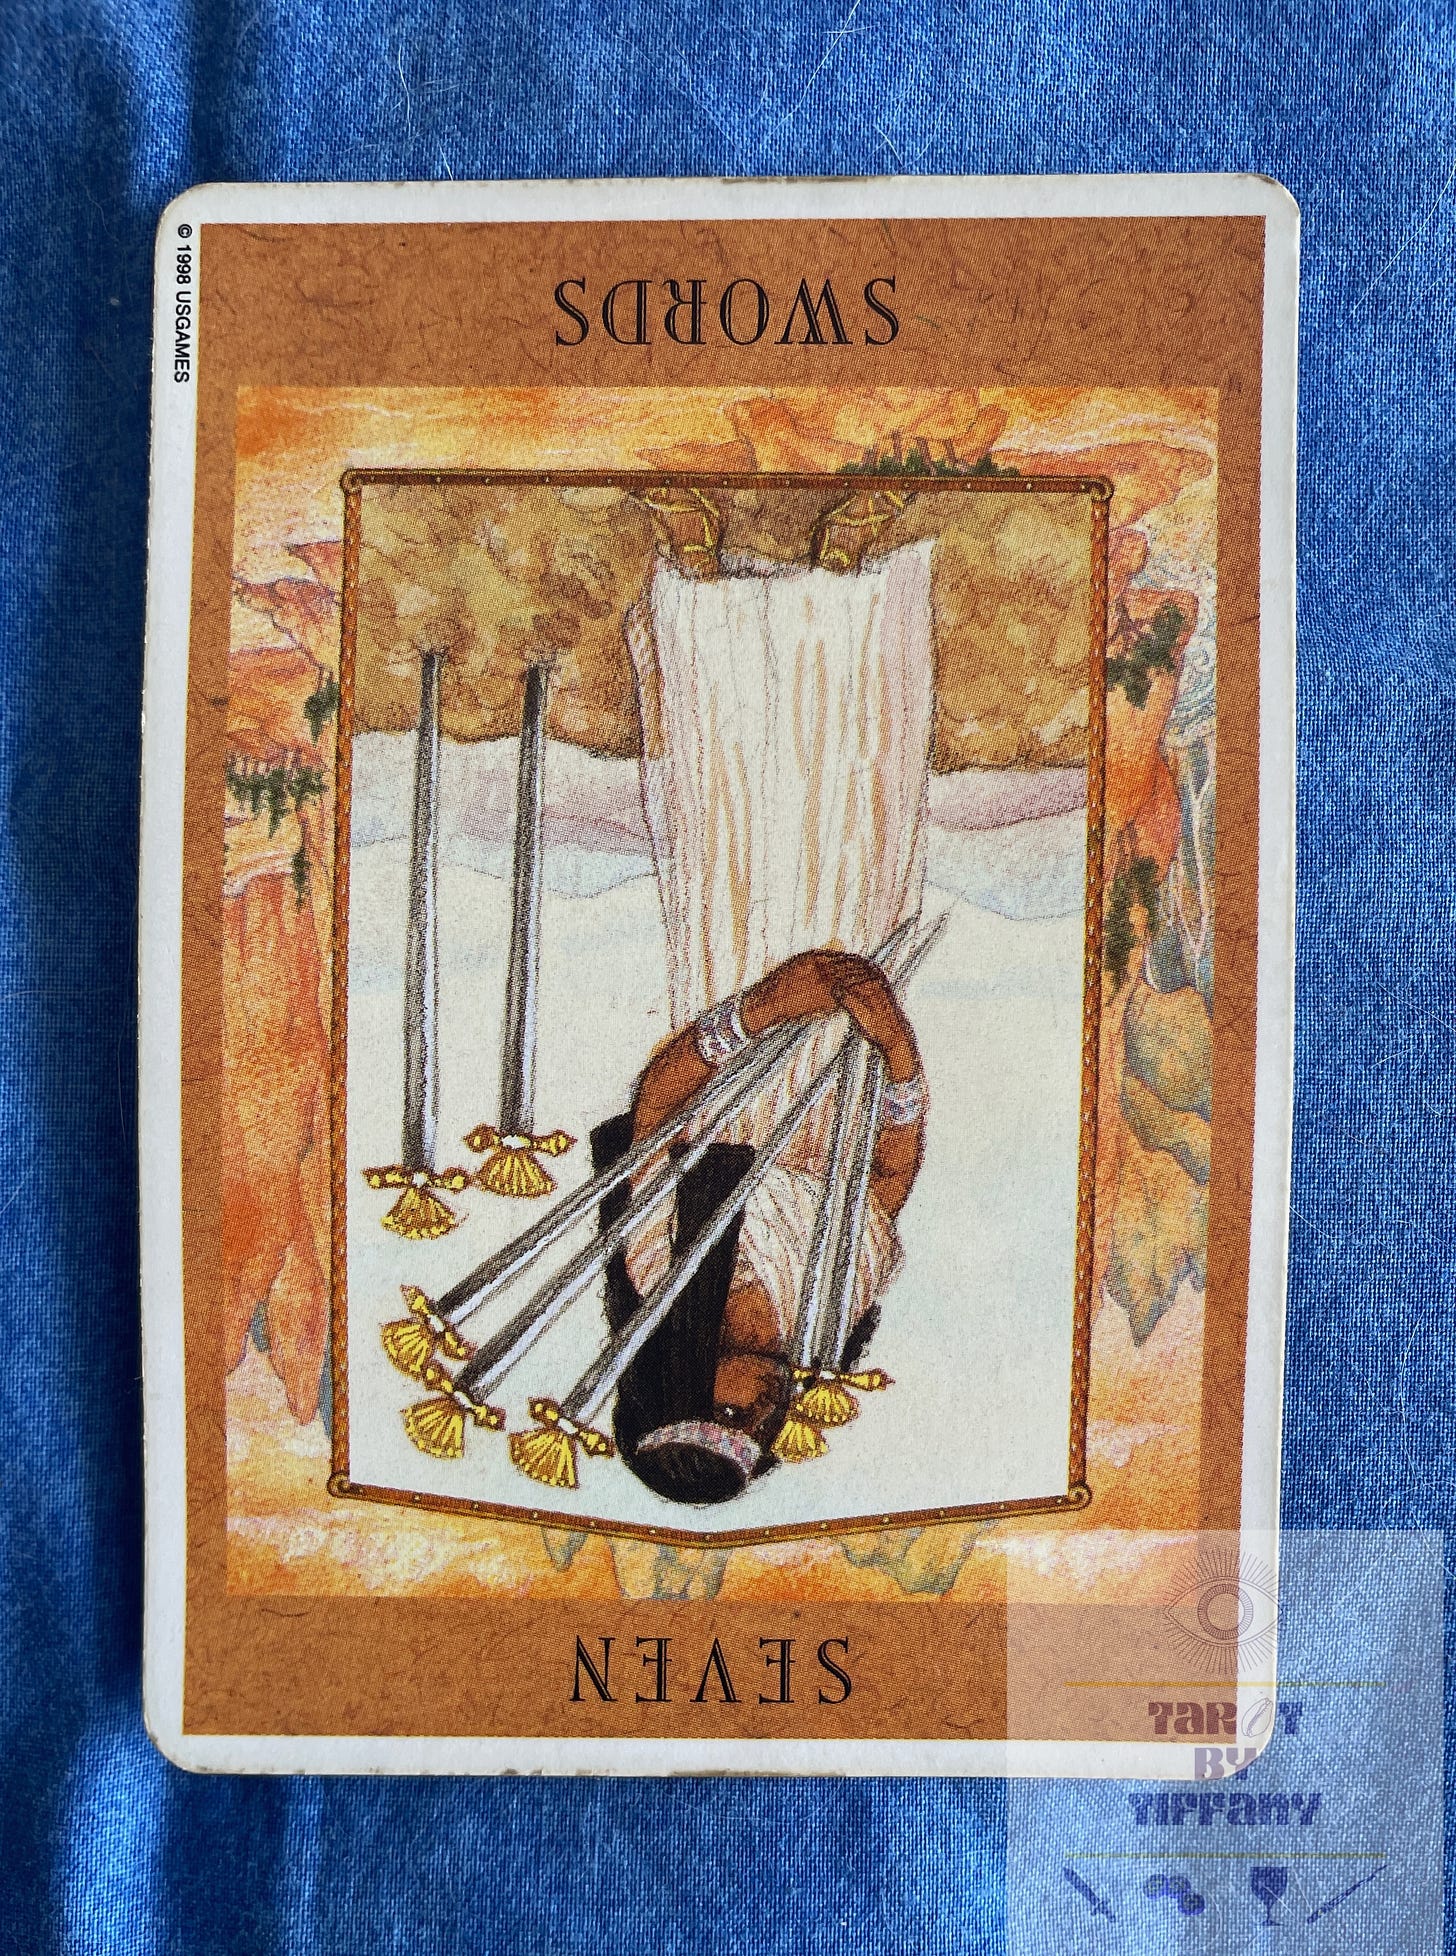 Image of the seven of swords (reversed) card from the Goddess Tarot. The card is on a blue cloth background. The card shows a brown-skinned woman in a long white gown with a white headpiece across the forehead of her long black hair. It looks Egyptian in tone. She holds five swords while two swords are stuck in the earth behind her.